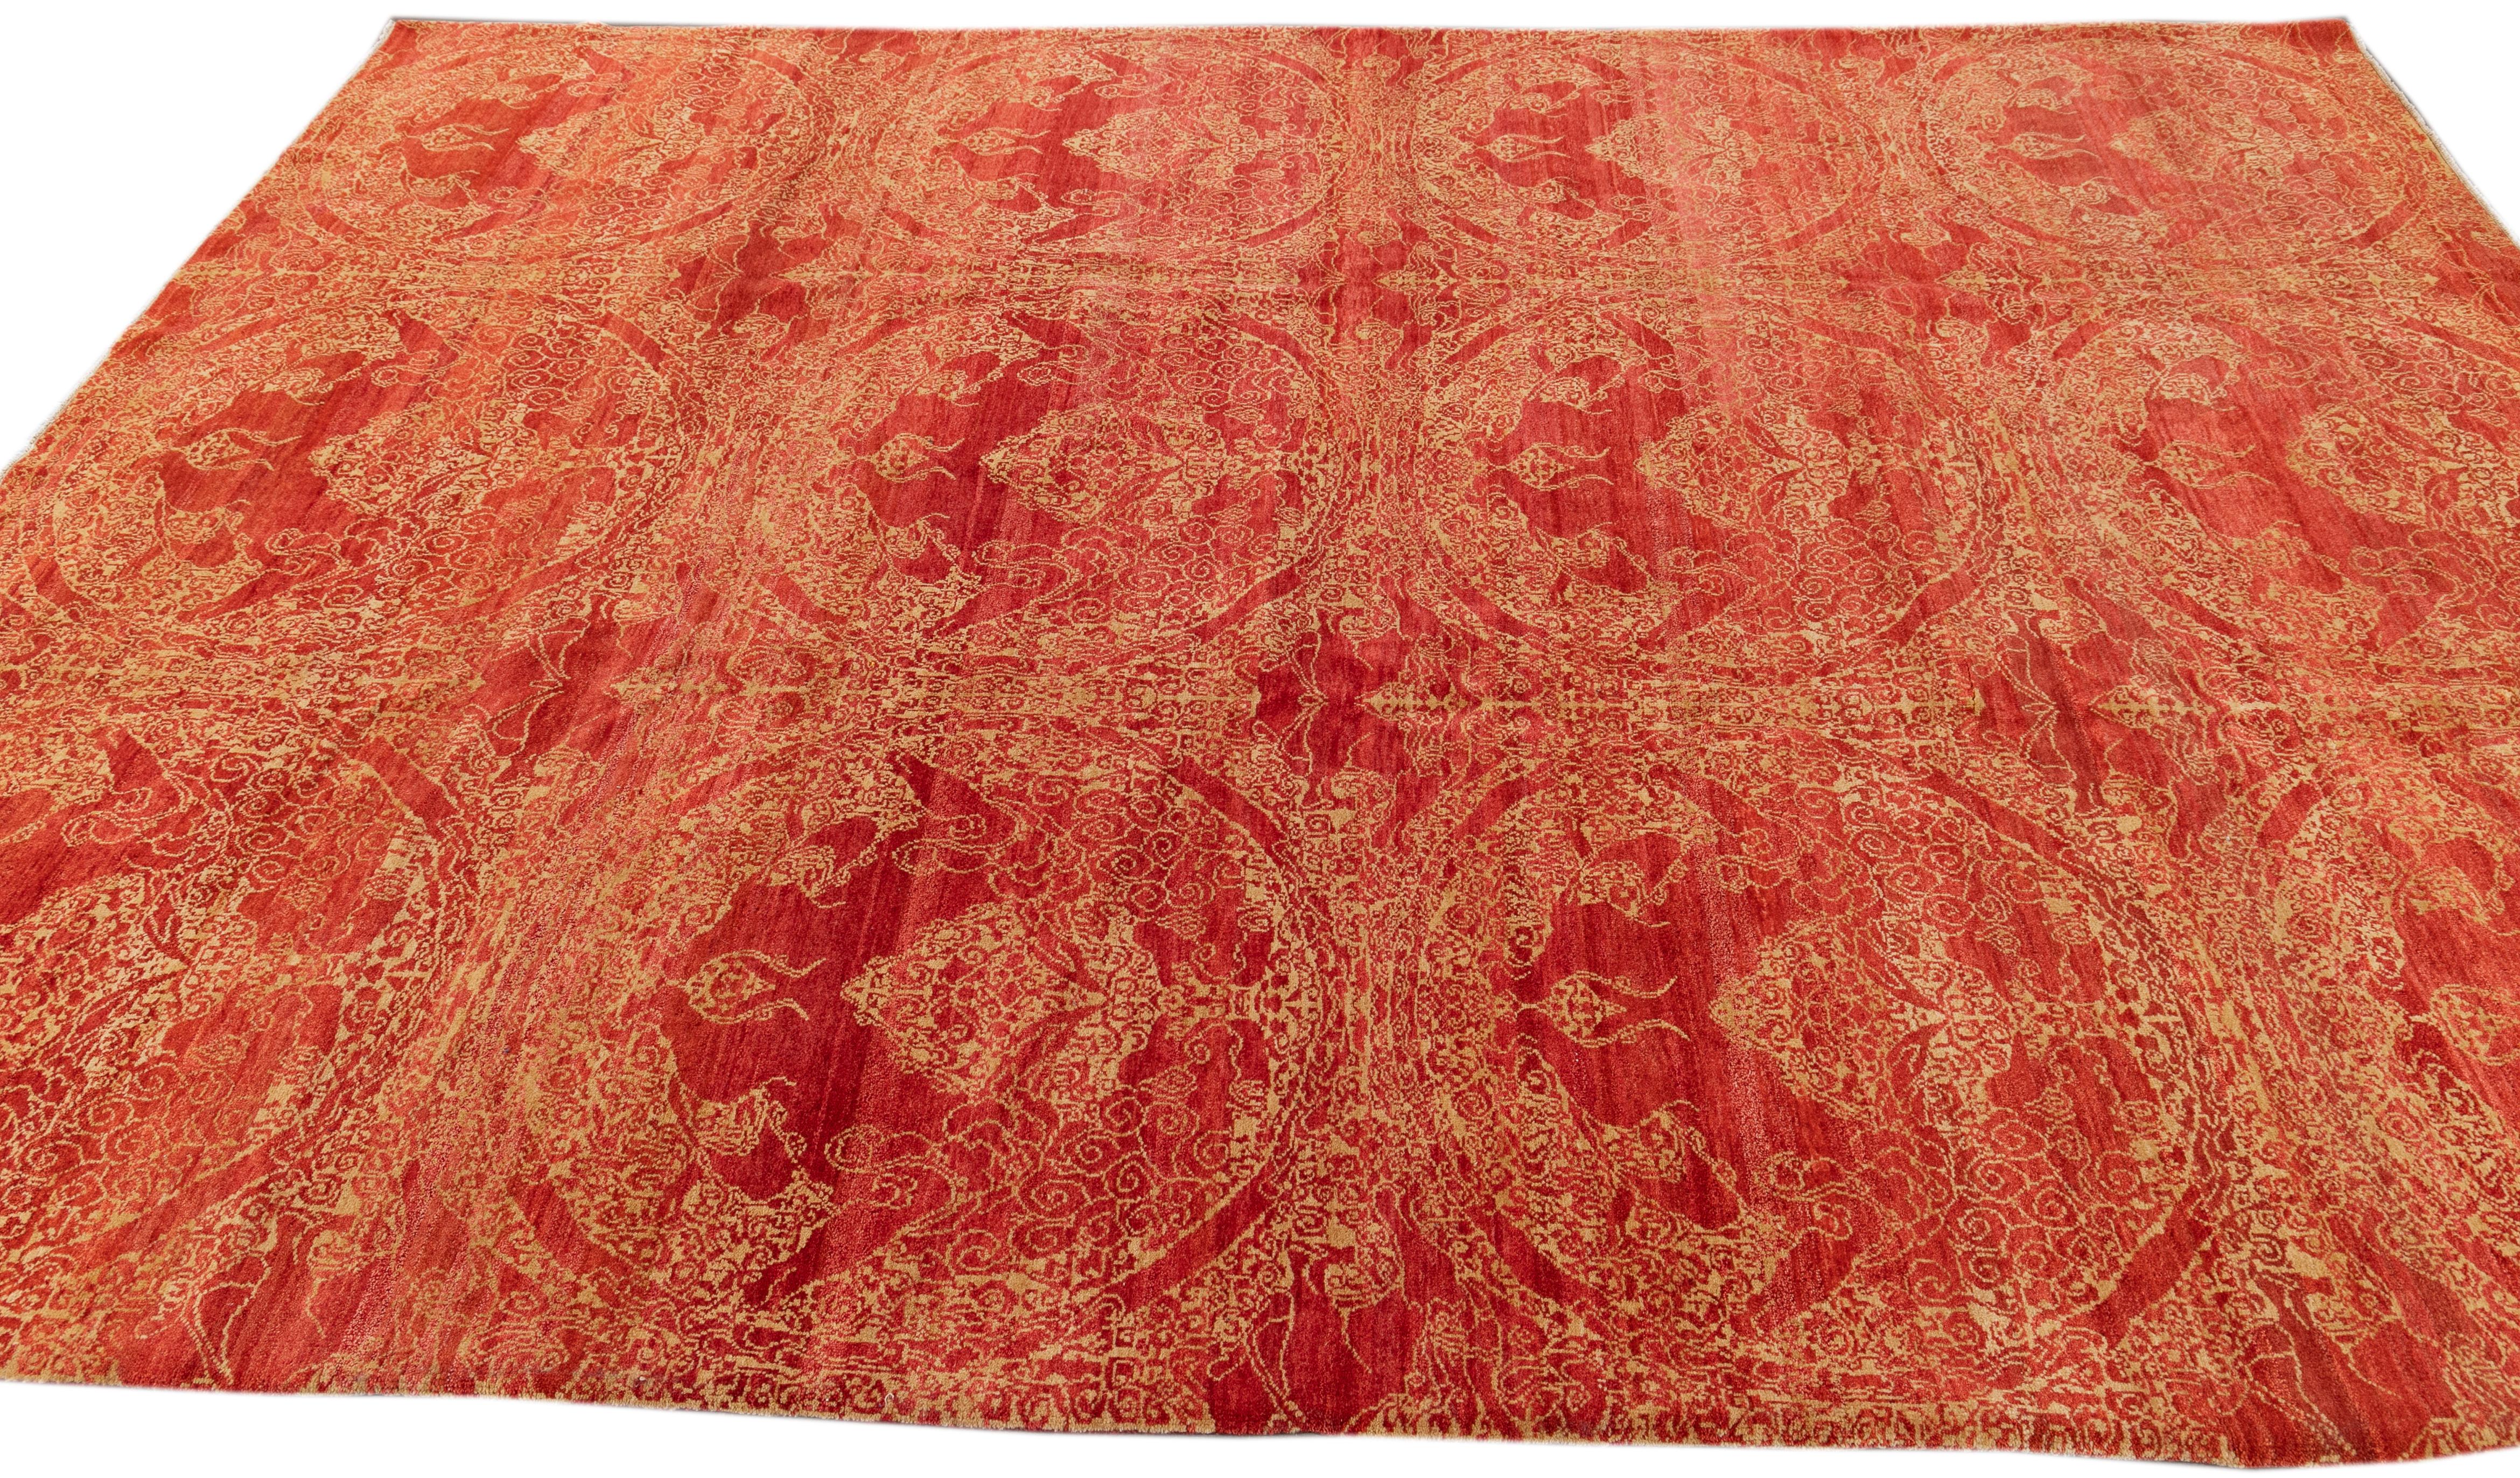 This hand-knotted wool rug exemplifies contemporary design with its captivating red foundation beautifully contrasted by sophisticated beige accents arranged in an exquisite medallion pattern throughout. Meticulously crafted with meticulous